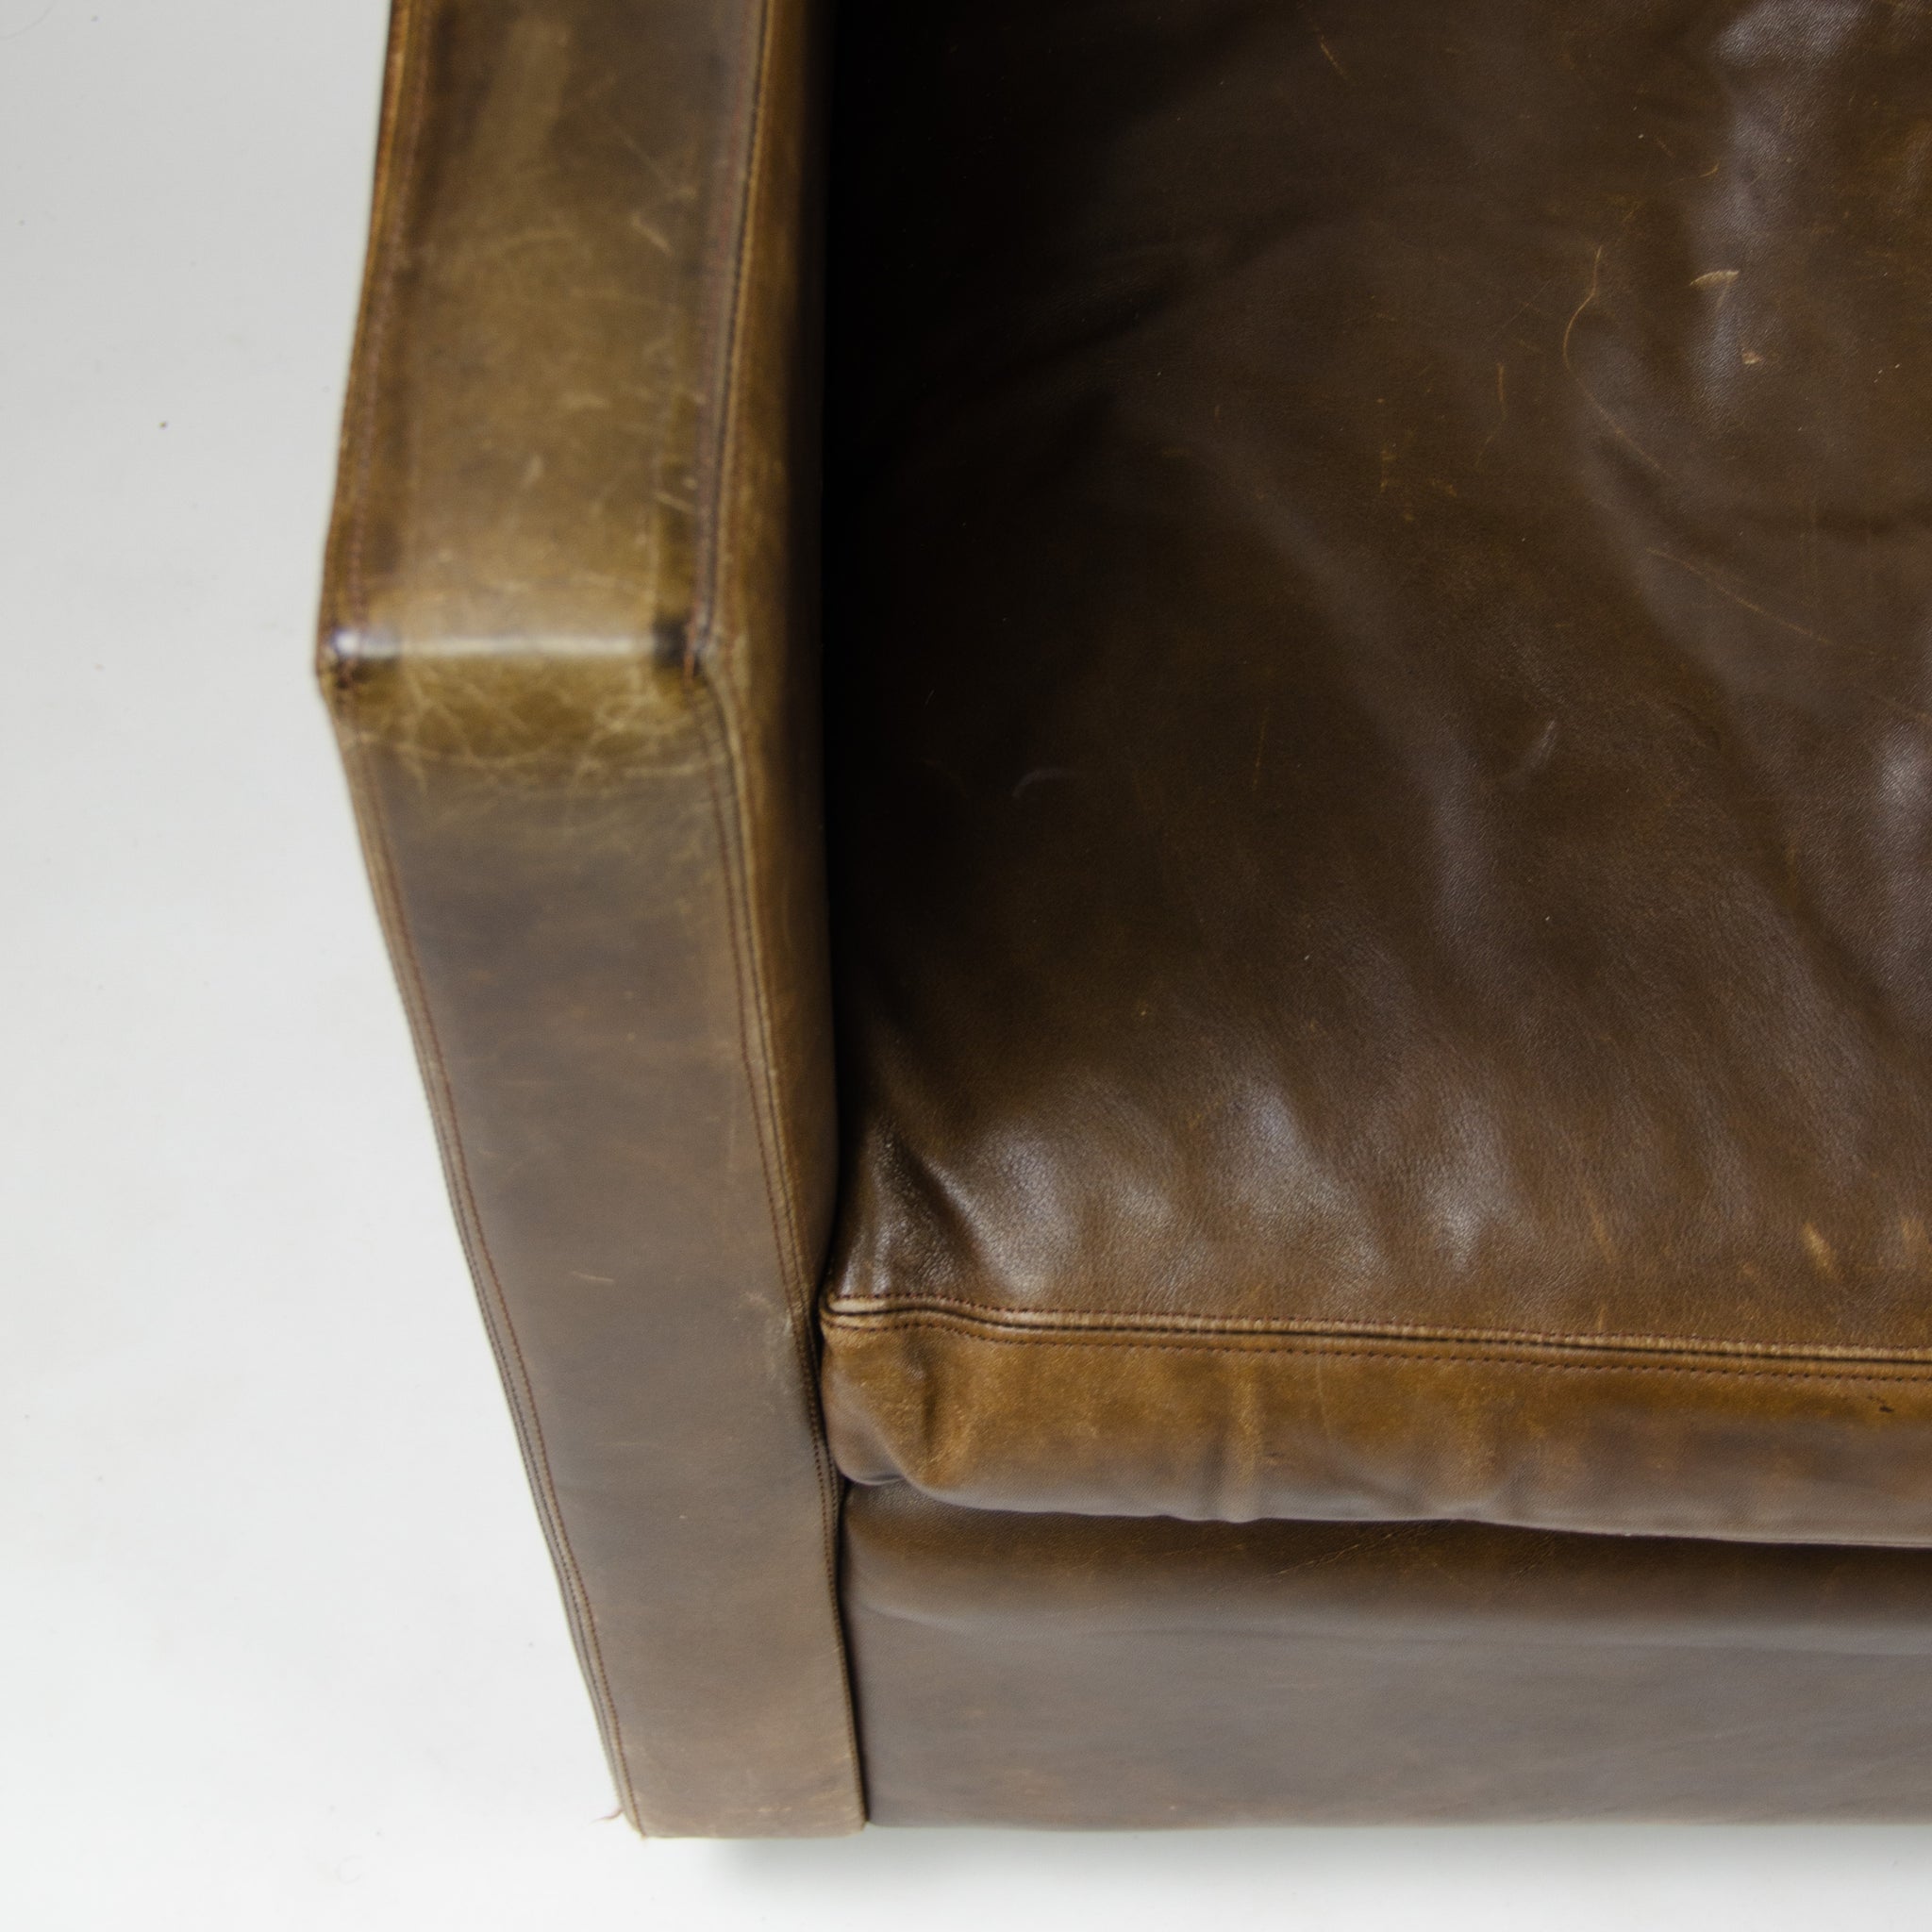 SOLD 1978 Knoll Charles Pfister Brown Leather Armchairs